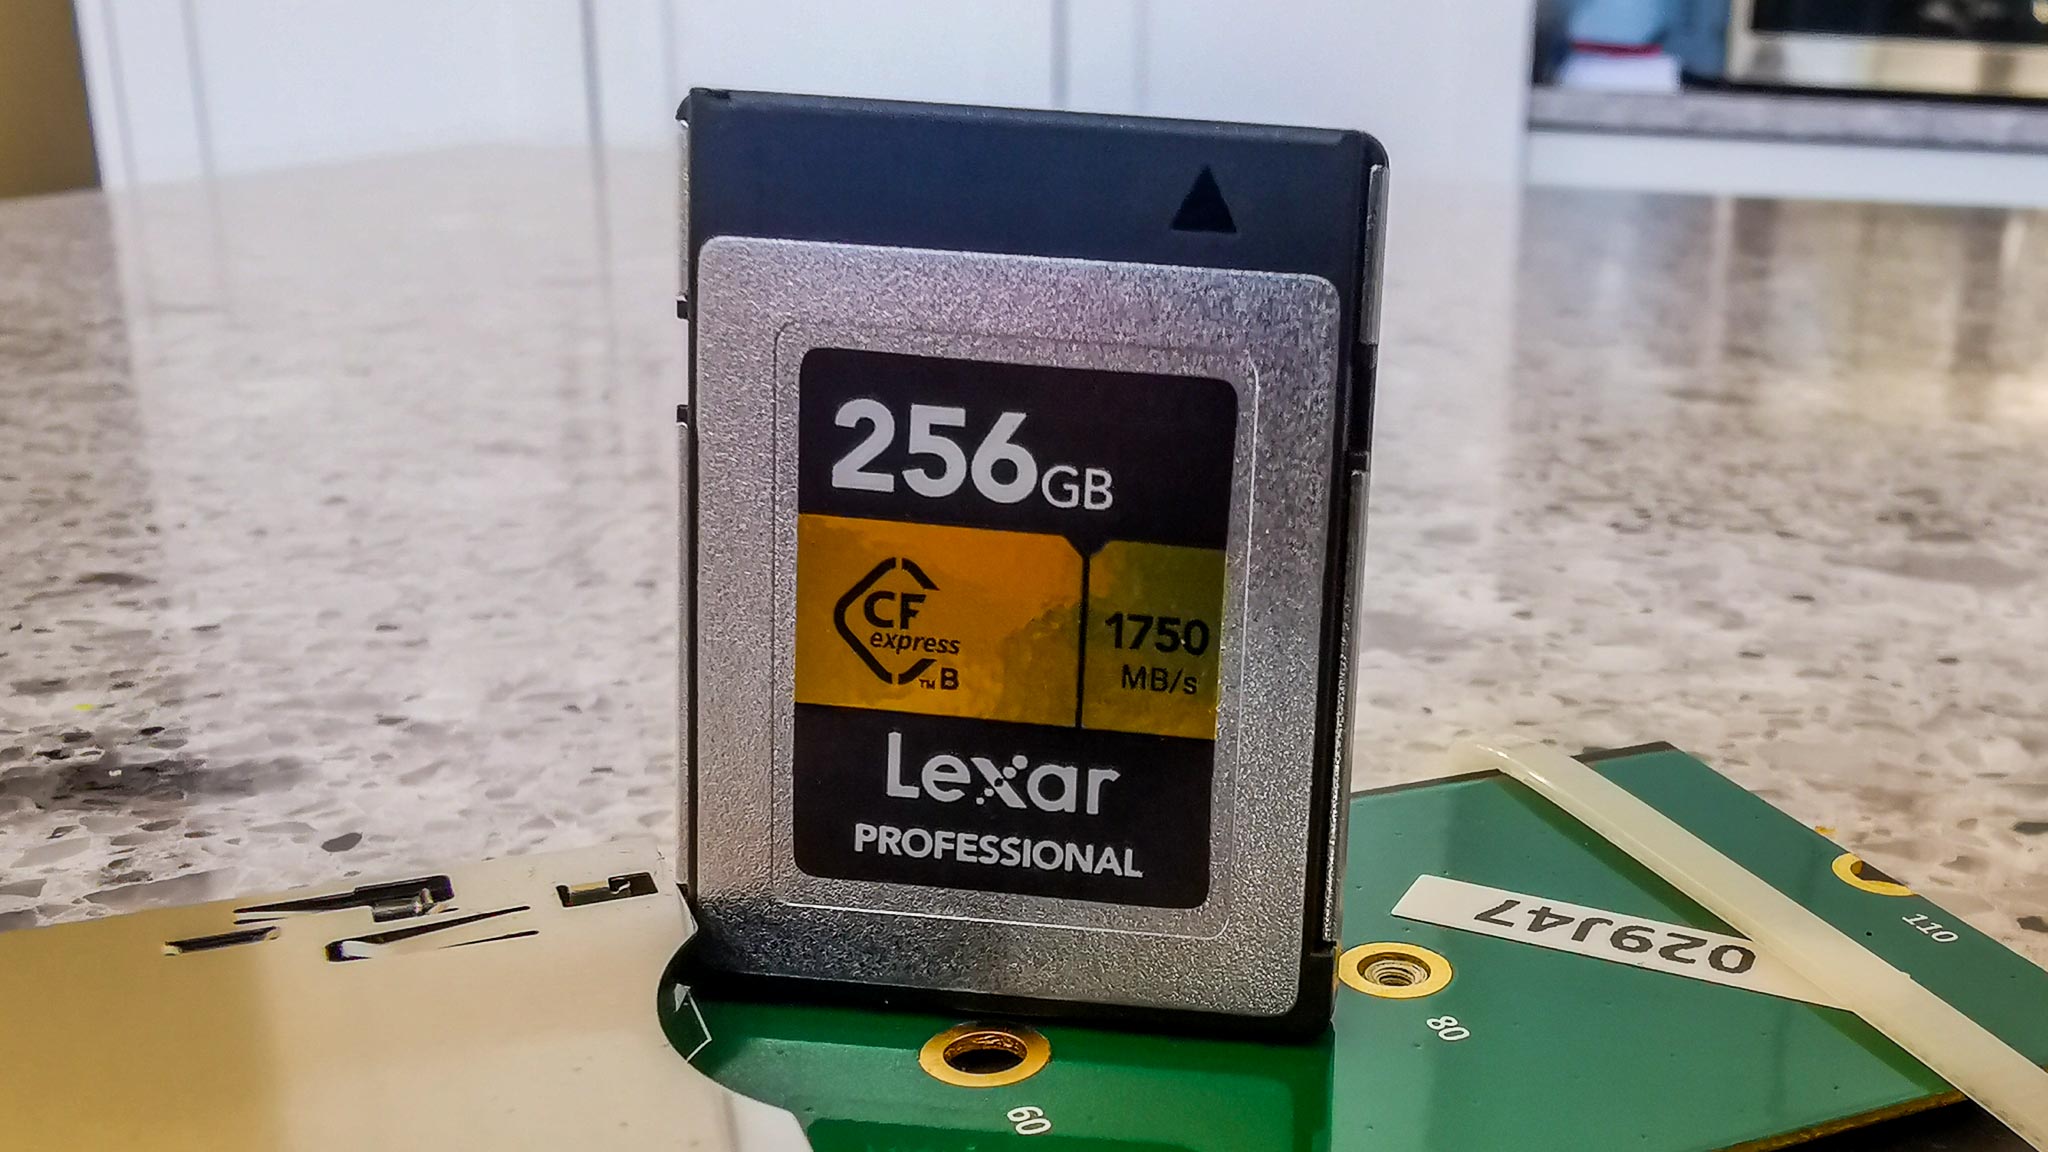 Lexar Professional CFexpress Type-B Card Review (256GB) - Much